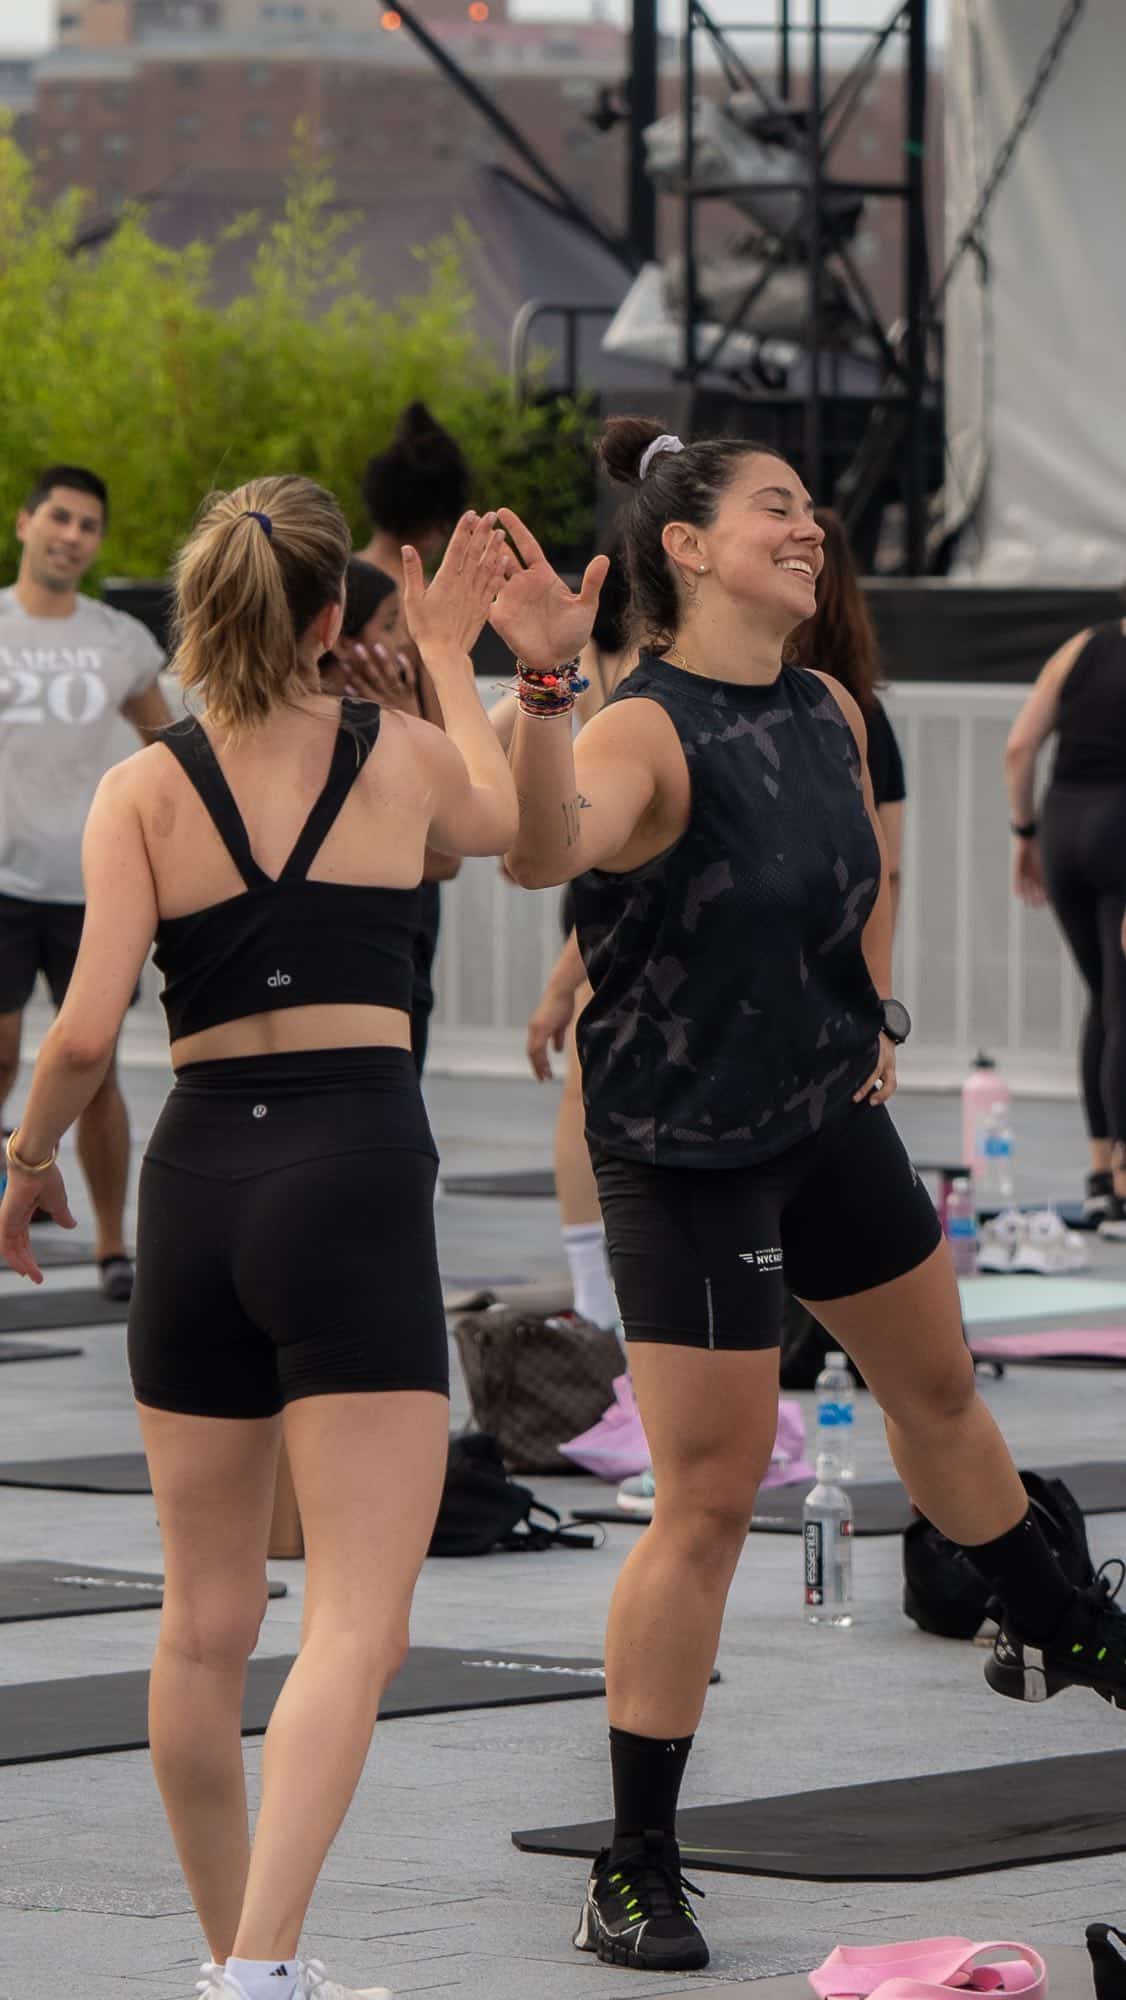 More fitness pros. More chance to sweat. The September Plus-Up just dropped. @aarmy is BACK by popular demand to train your body and mind with coach & co-founder Akin Akman.

🗓️ Wed, 9/27
 6:00pm - 6:45pm
 The Rooftop at Pier 17
is presented by @nyphospital

All proceeds of ticket sales will be donated to American Red Cross to help those affected by the wildfires in Hawaii.

Details ➤ link in bio